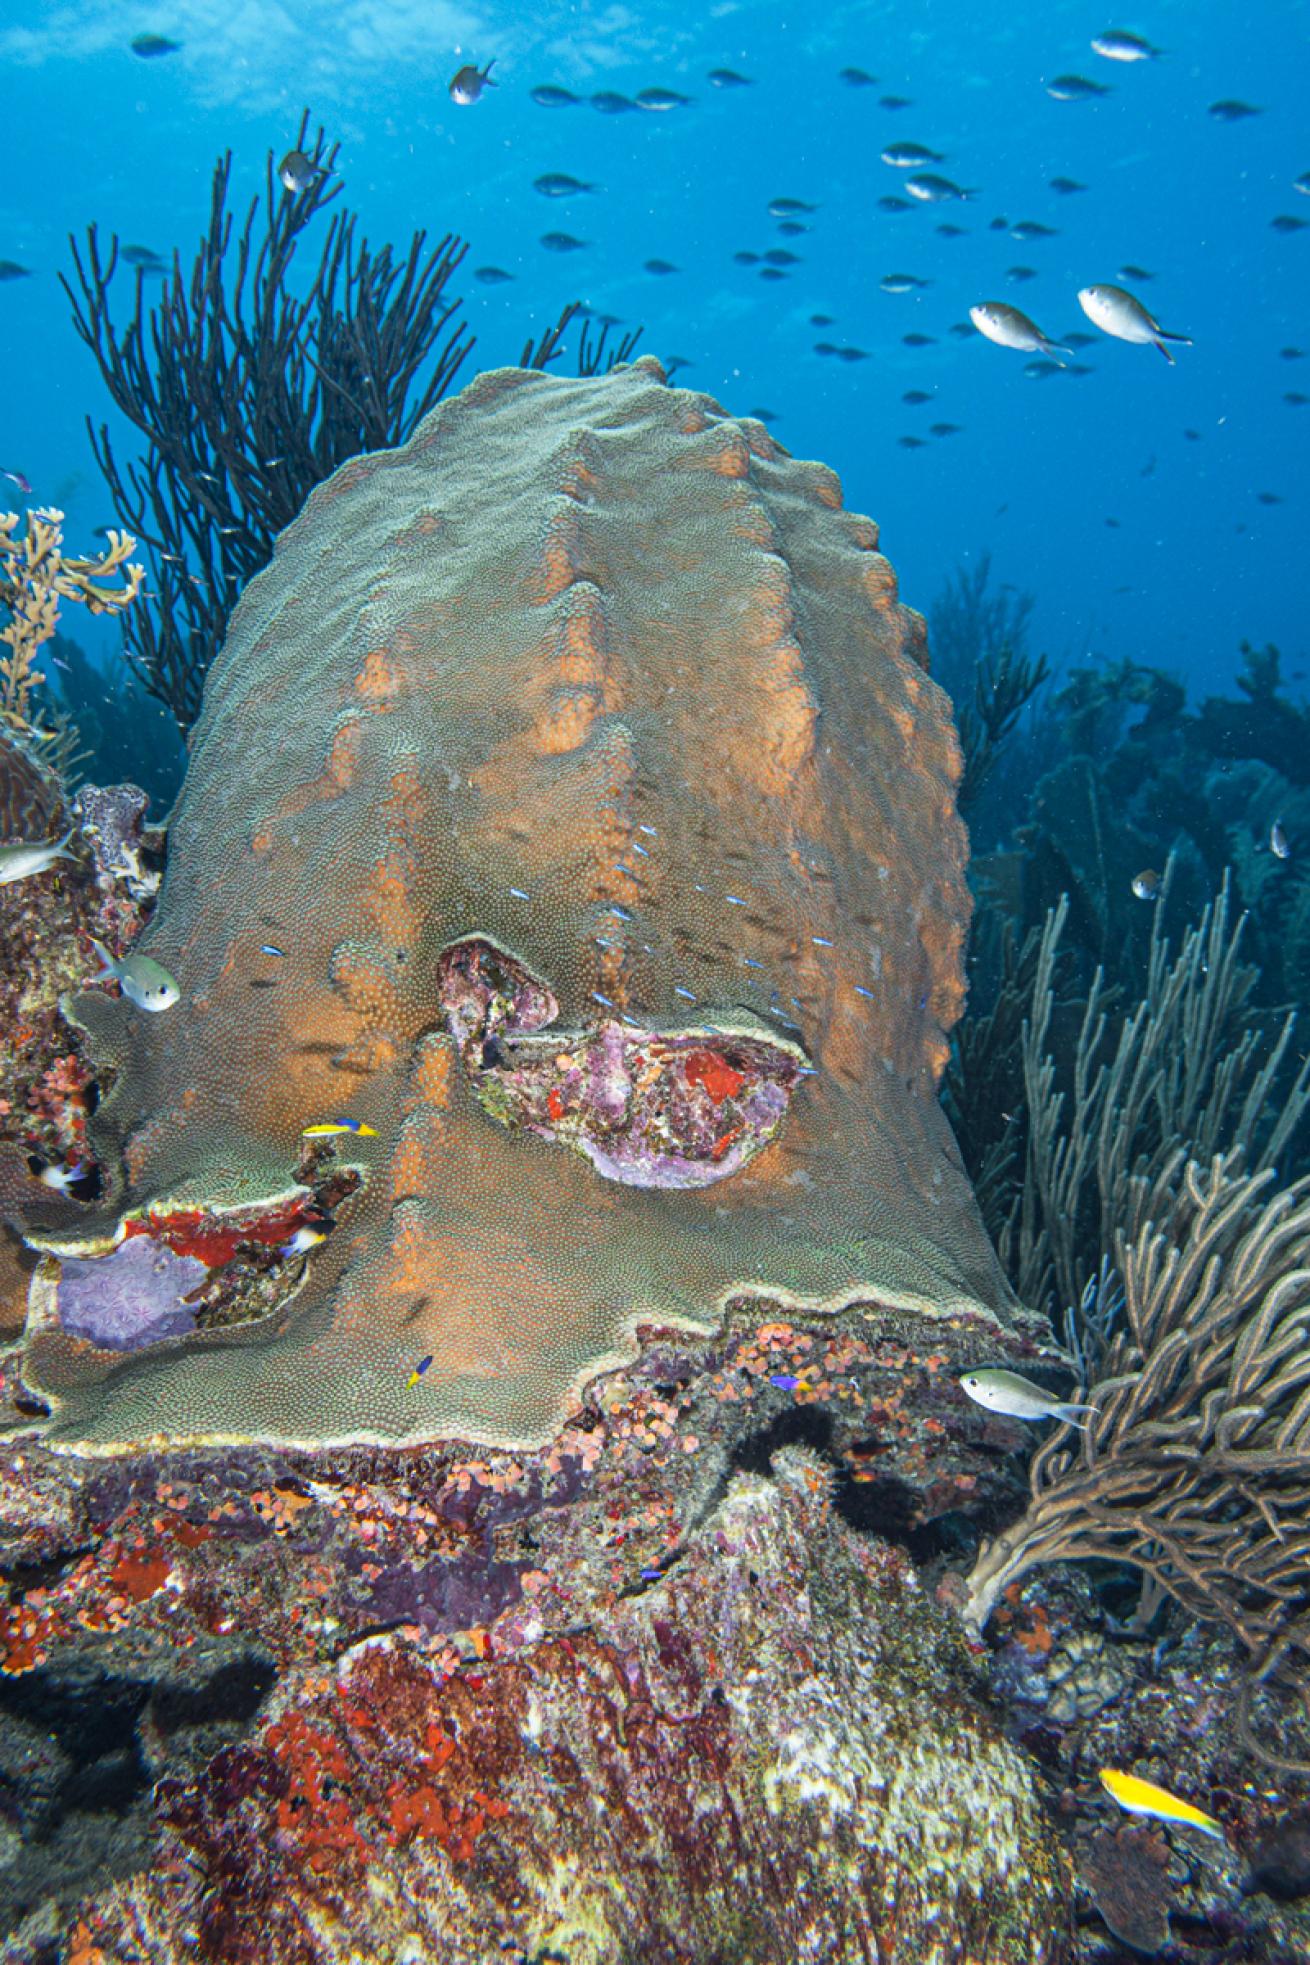 Lively reefs and attractions like this mountainous star coral await on Bonaire’s shore dives.